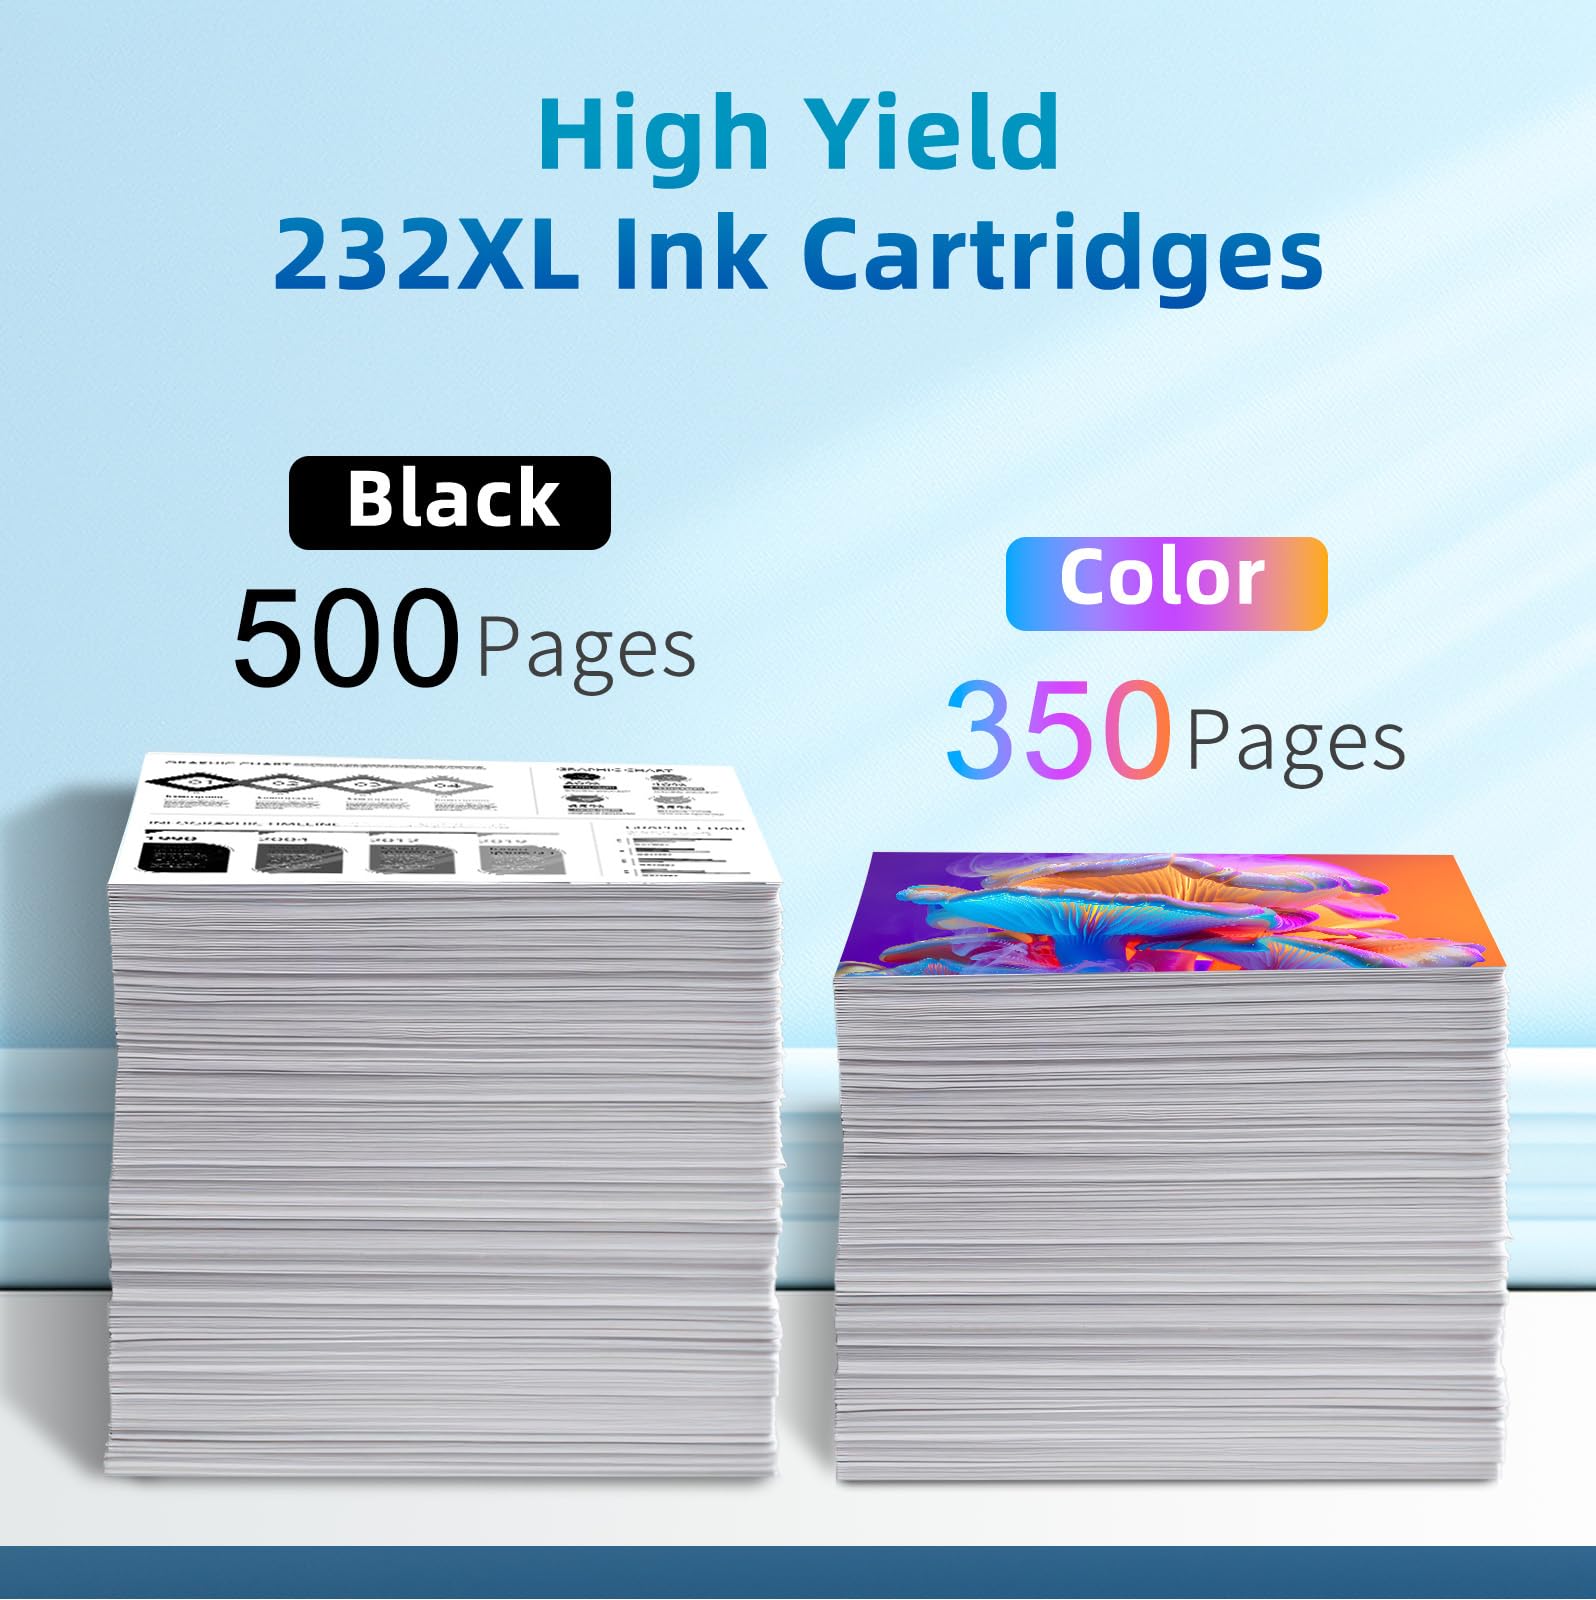 High Yield 232XL Ink Cartridges Page Yield:  black232XL cartridge prints 500 pages and the color cartridges print 350 pages each.